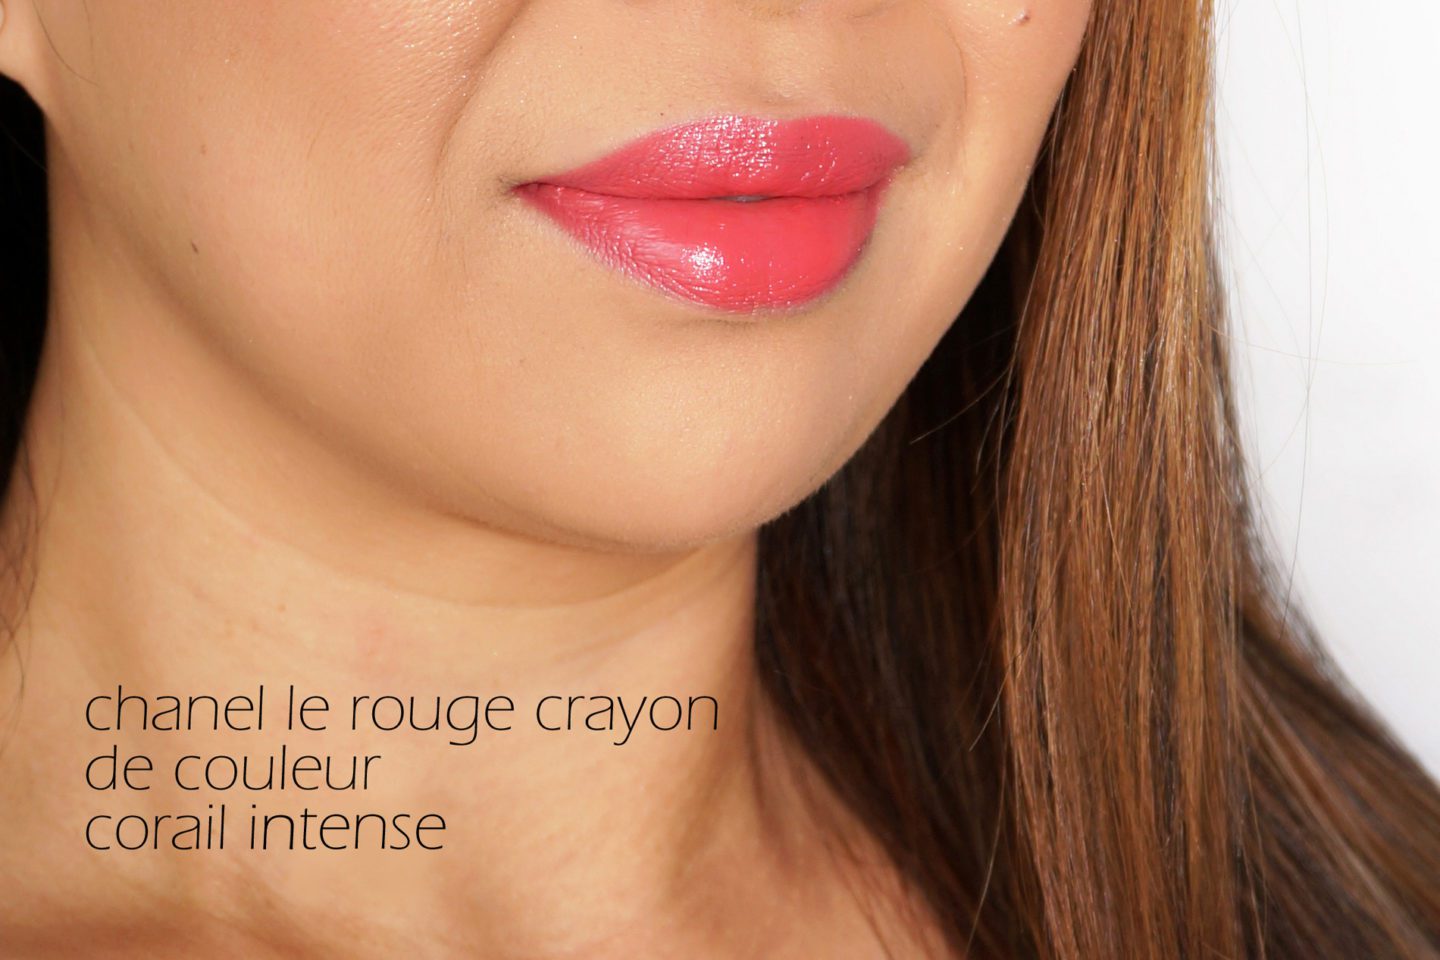 Chanel Le Rouge Crayon Corail Intense swatch